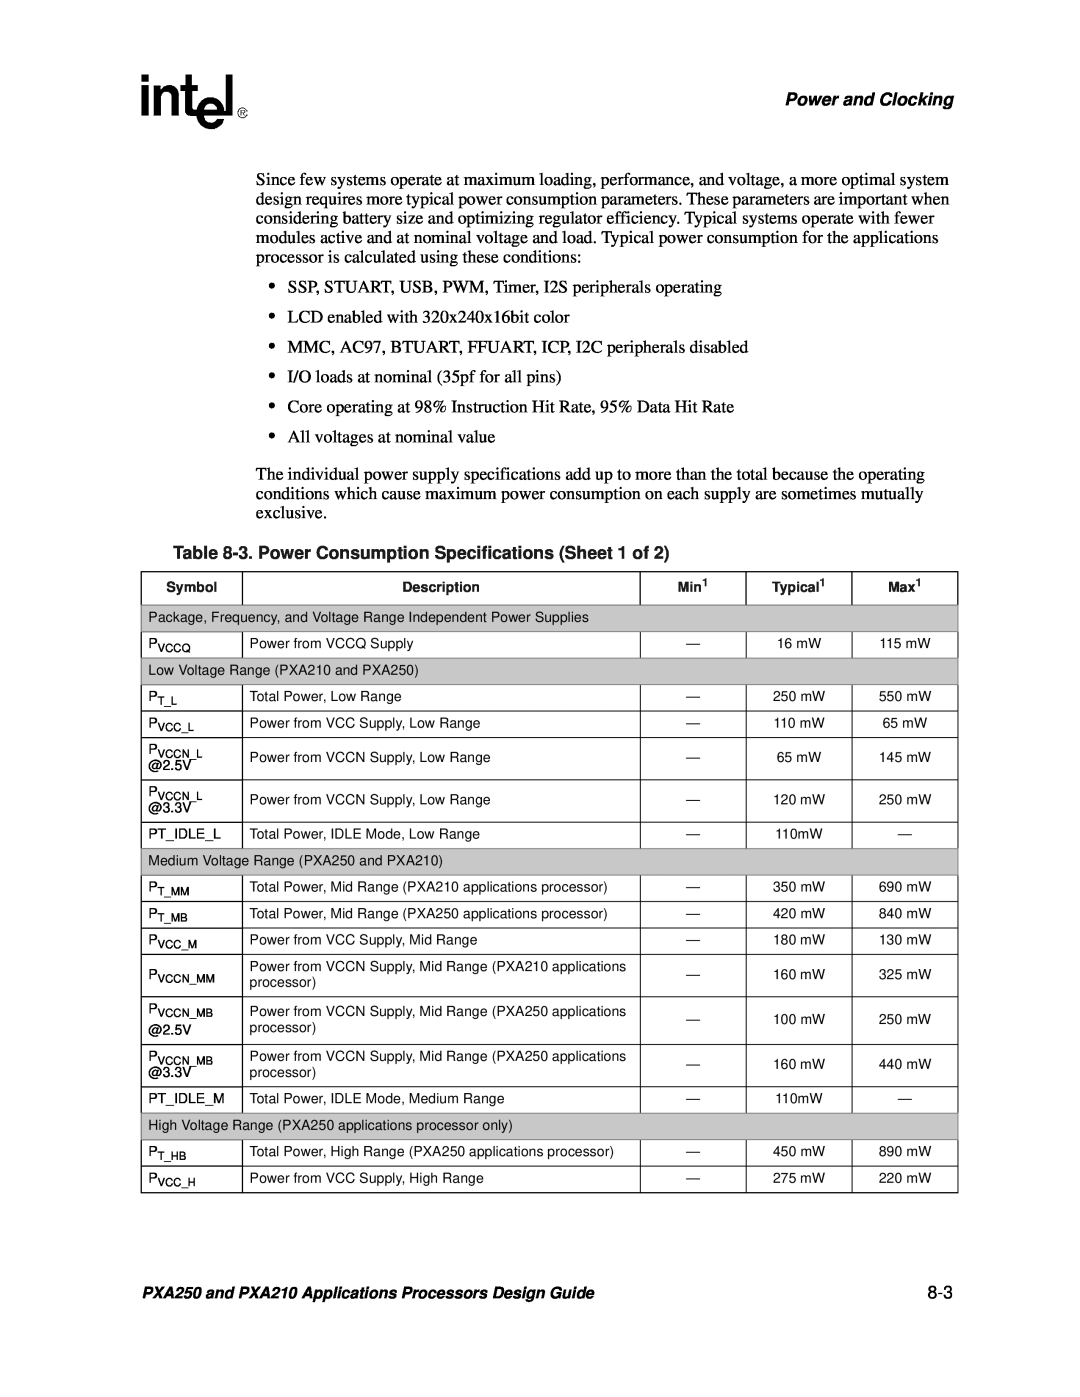 Intel PXA250 and PXA210 manual Power and Clocking, 3. Power Consumption Specifications Sheet 1 of 